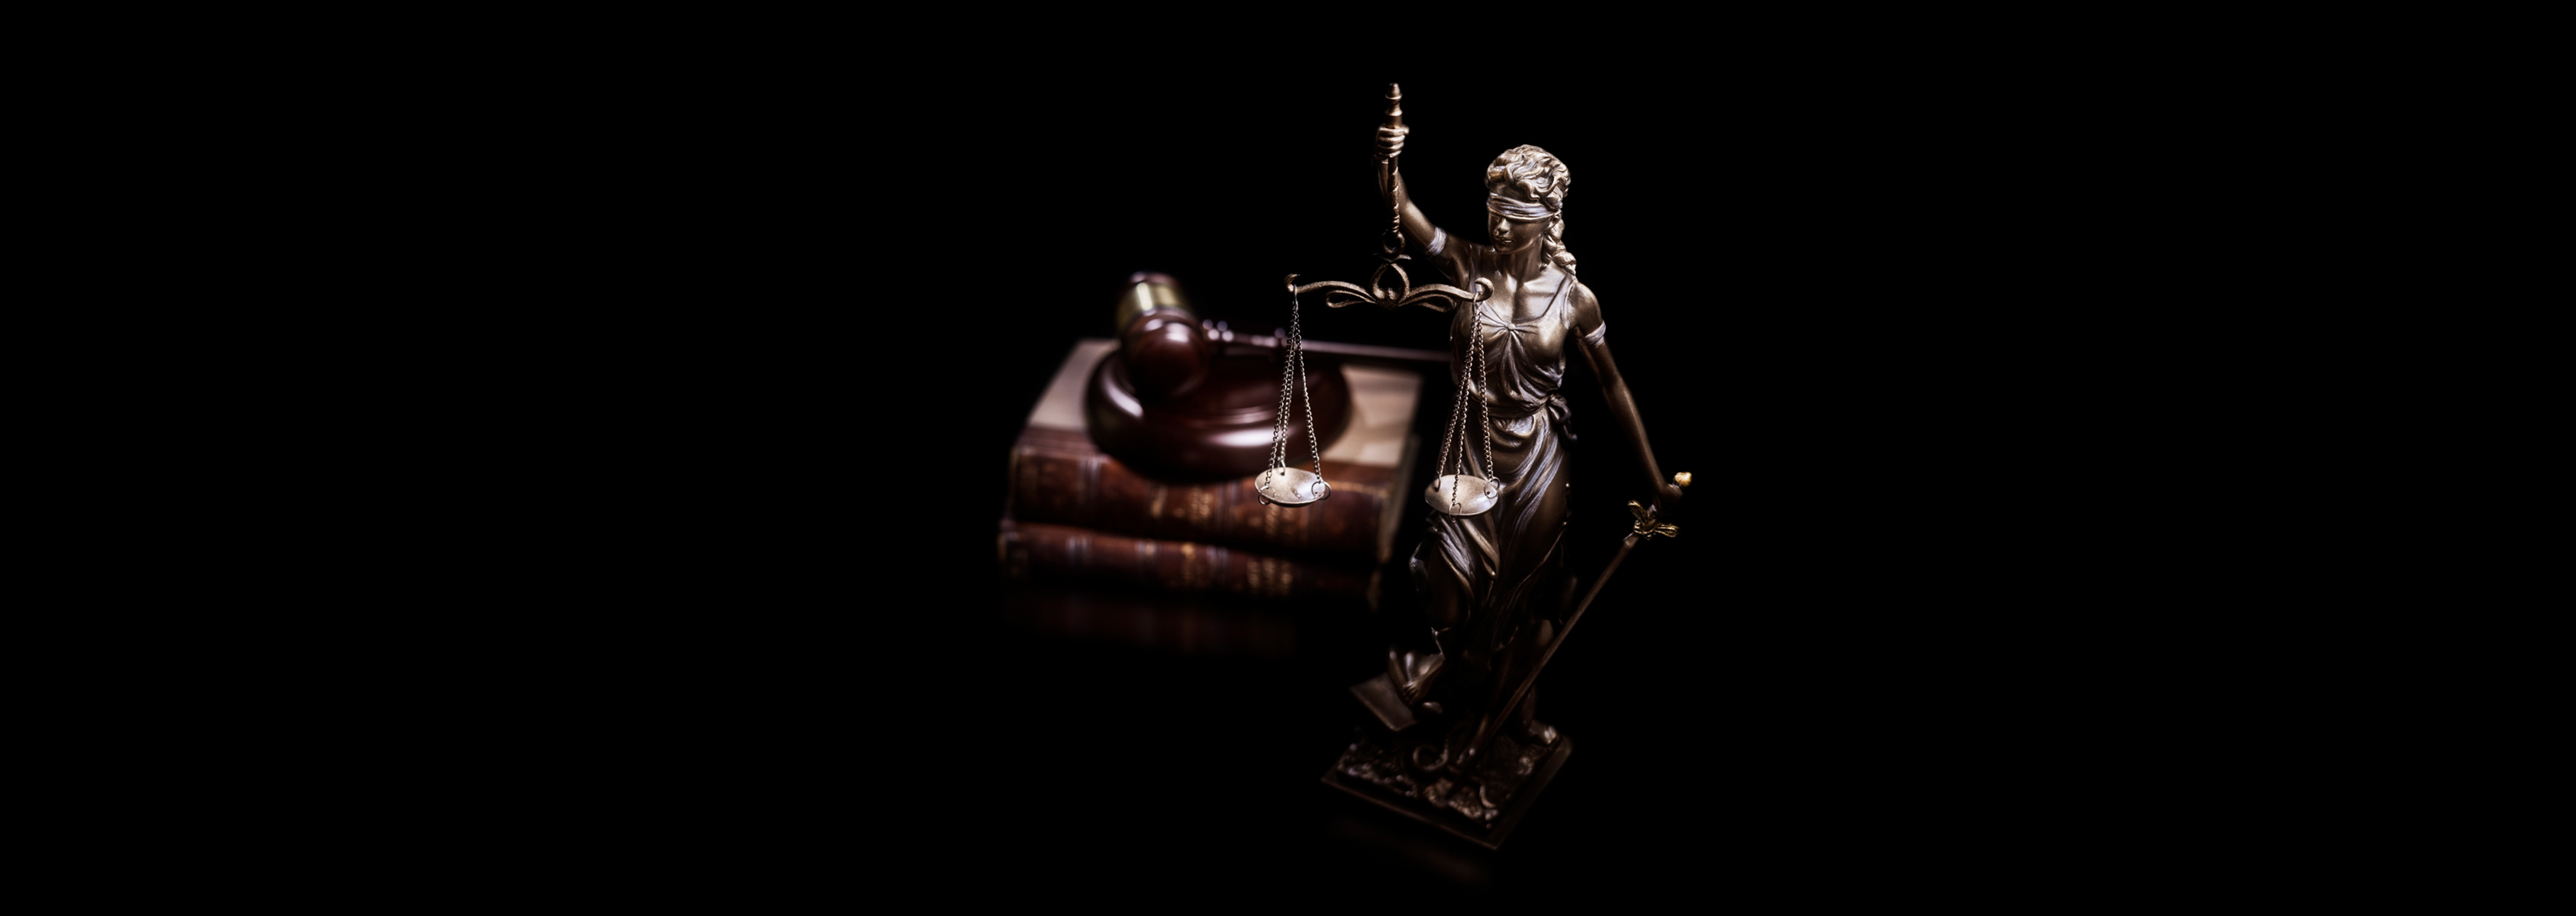 A statue of a woman holding a chain level distributer in front of books and a gavel